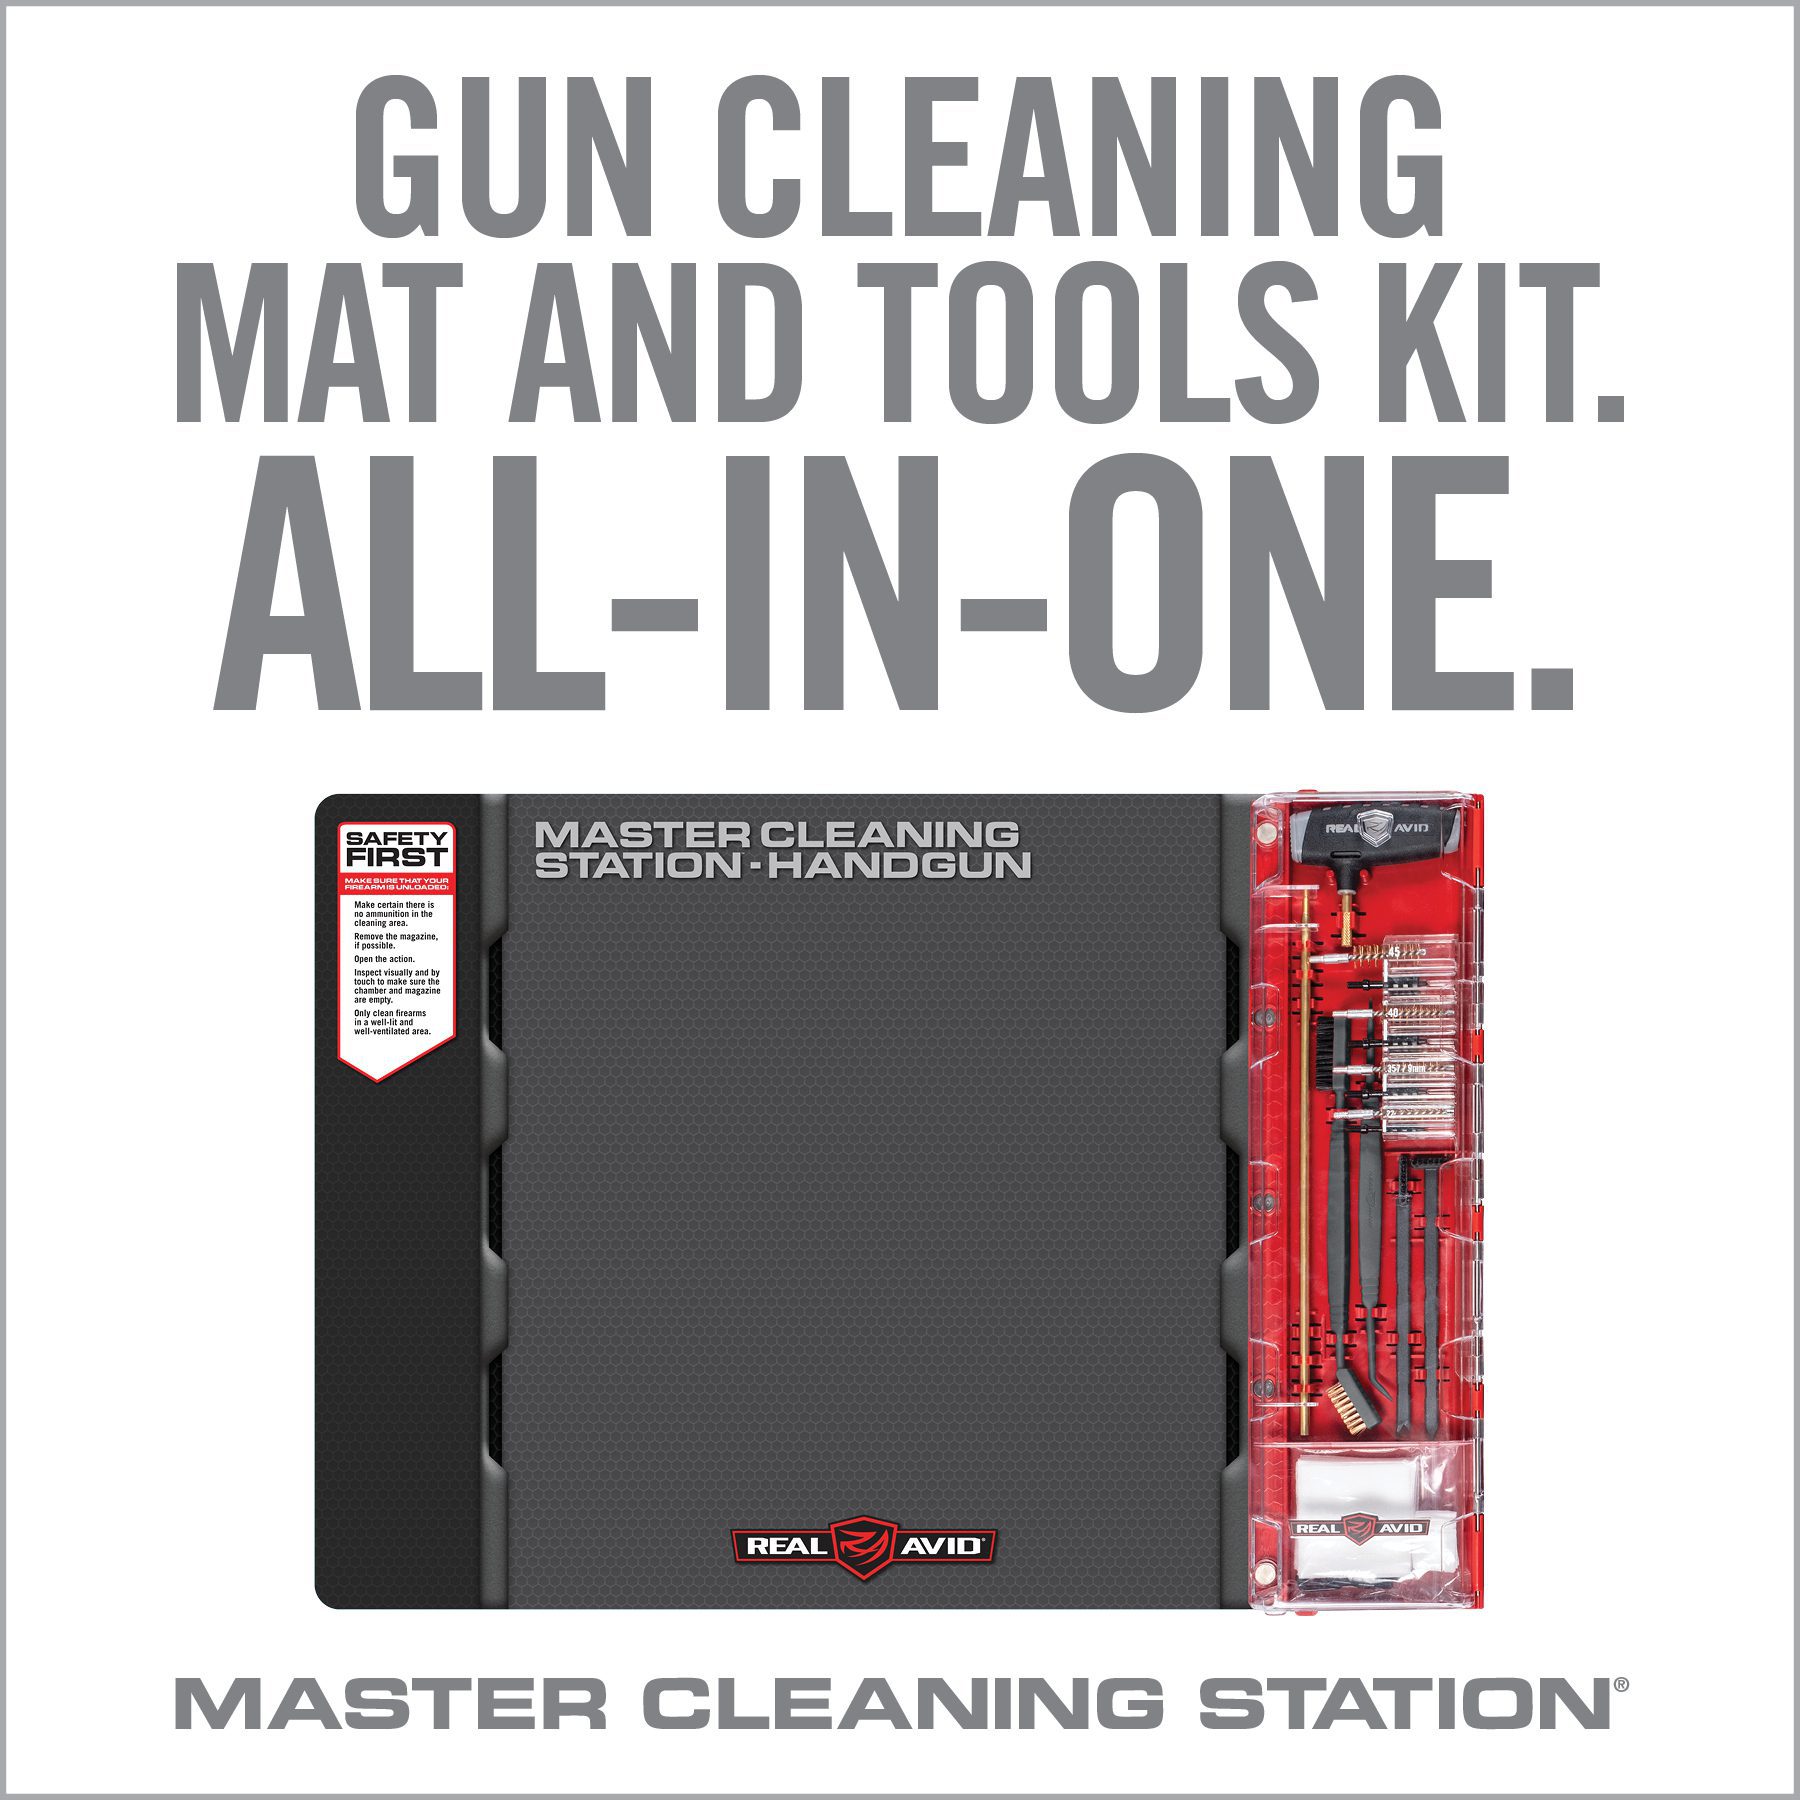 the gun cleaning mat and tools kit all - in - one